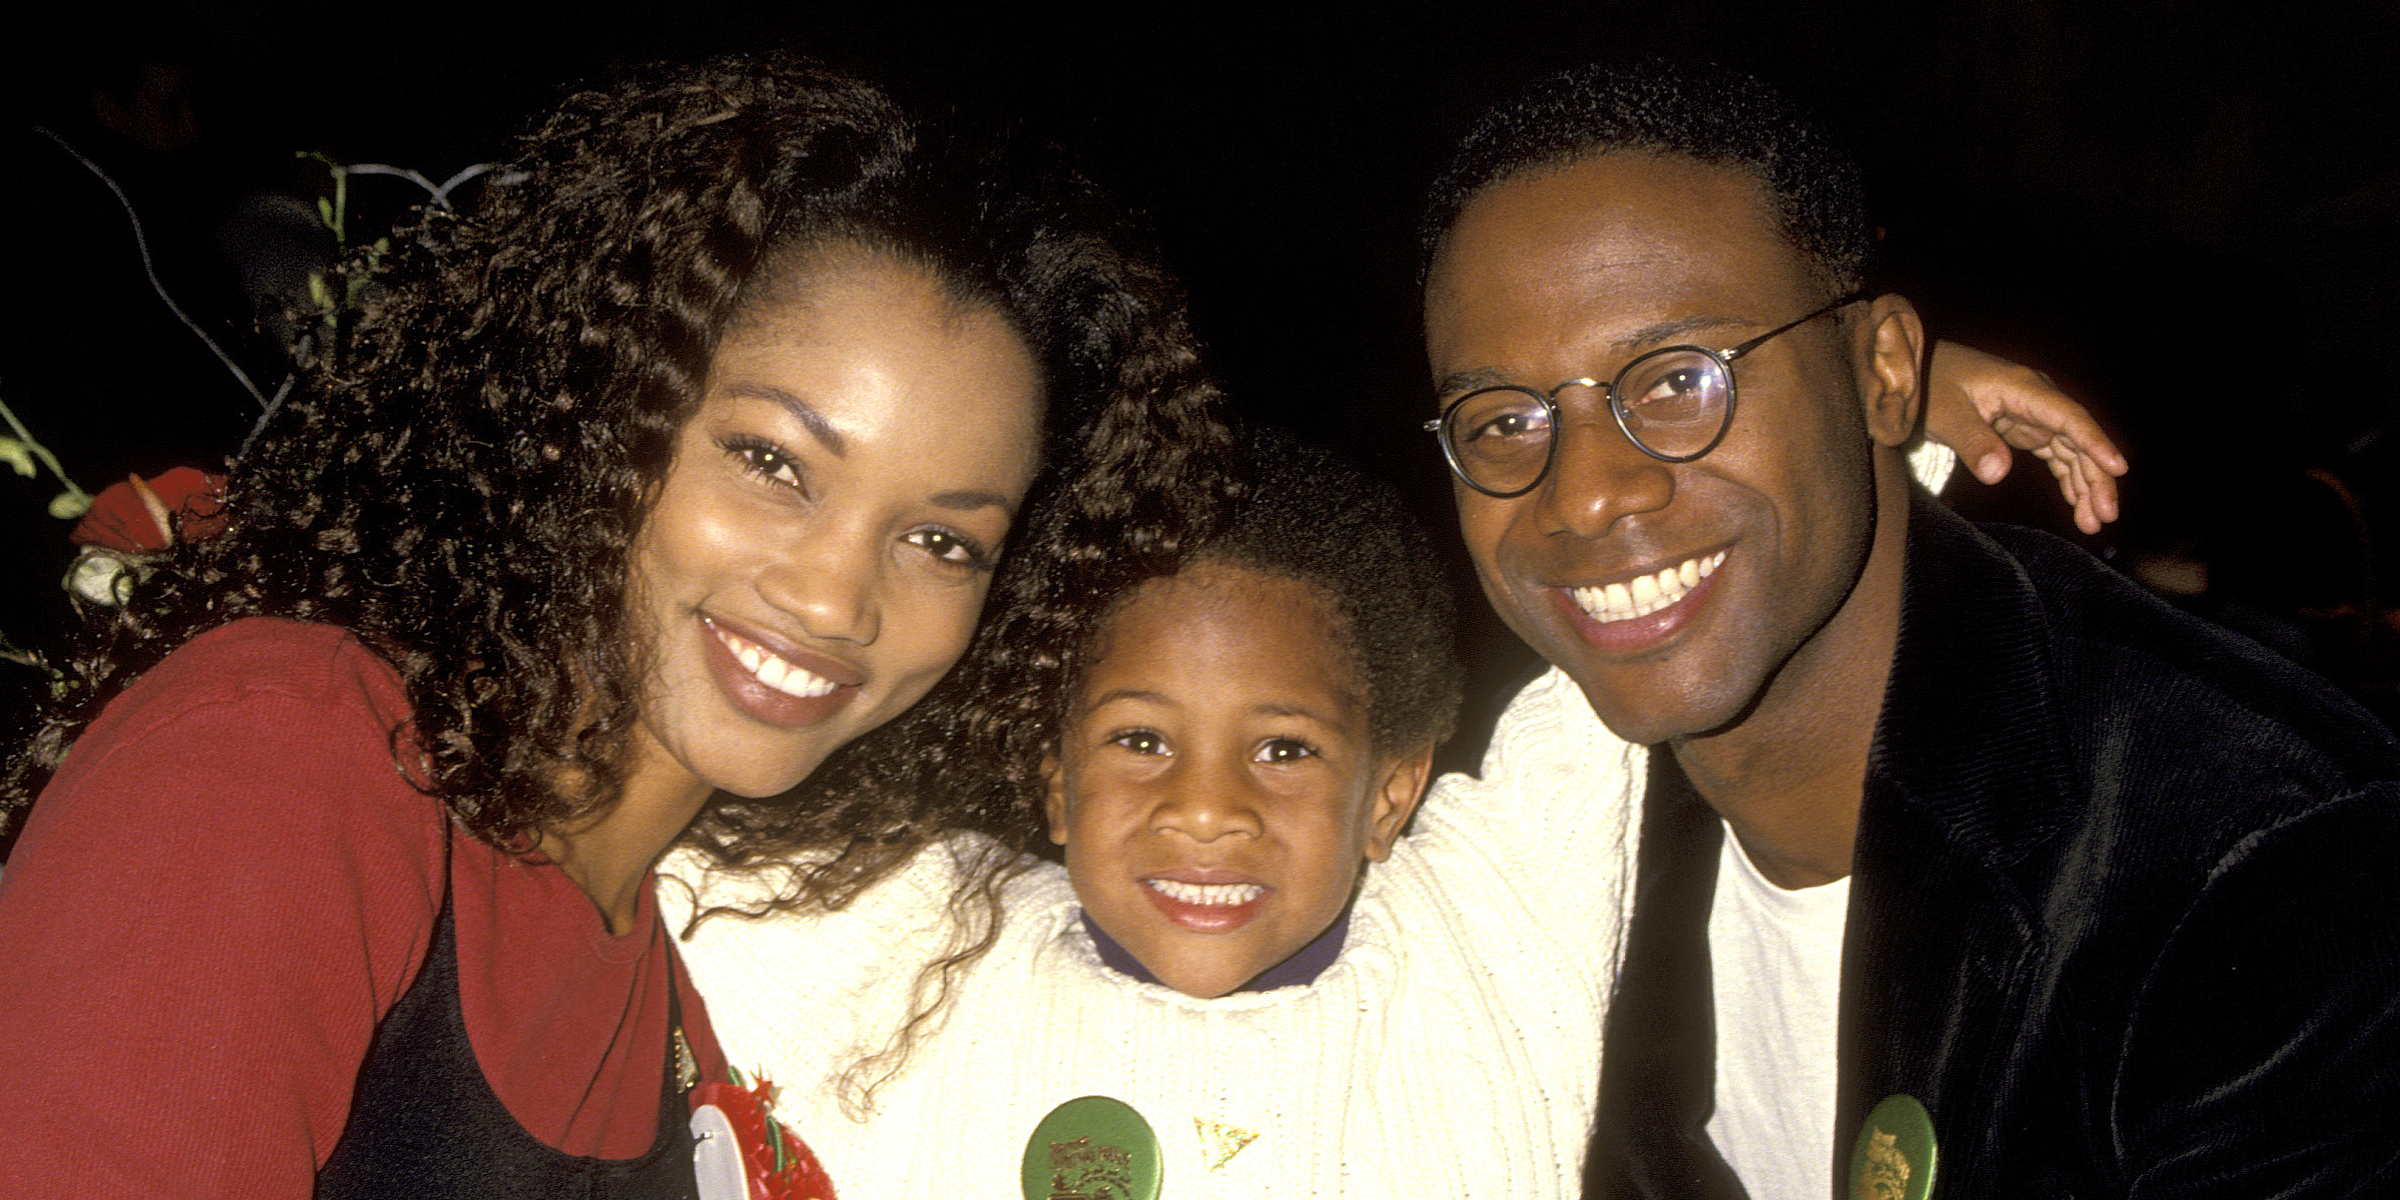 Daniel Saunders, Garcelle Beauvais and Their Son Oliver | Source: Getty Imager